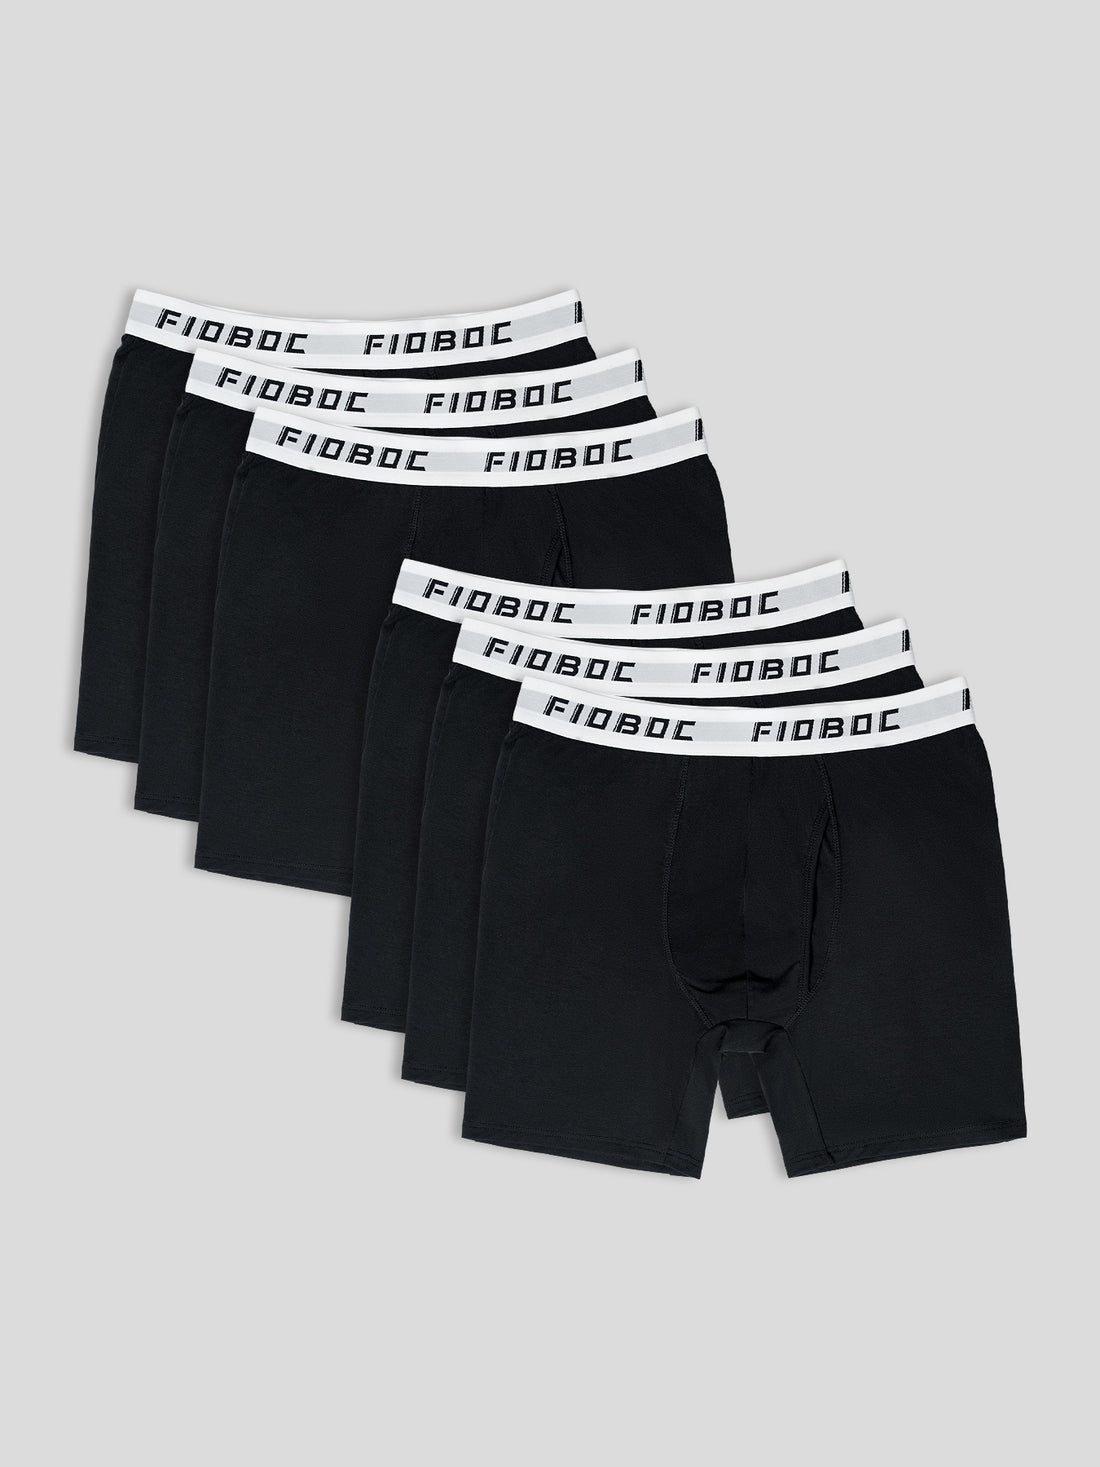 StayCool Boxer Briefs 6-Pack